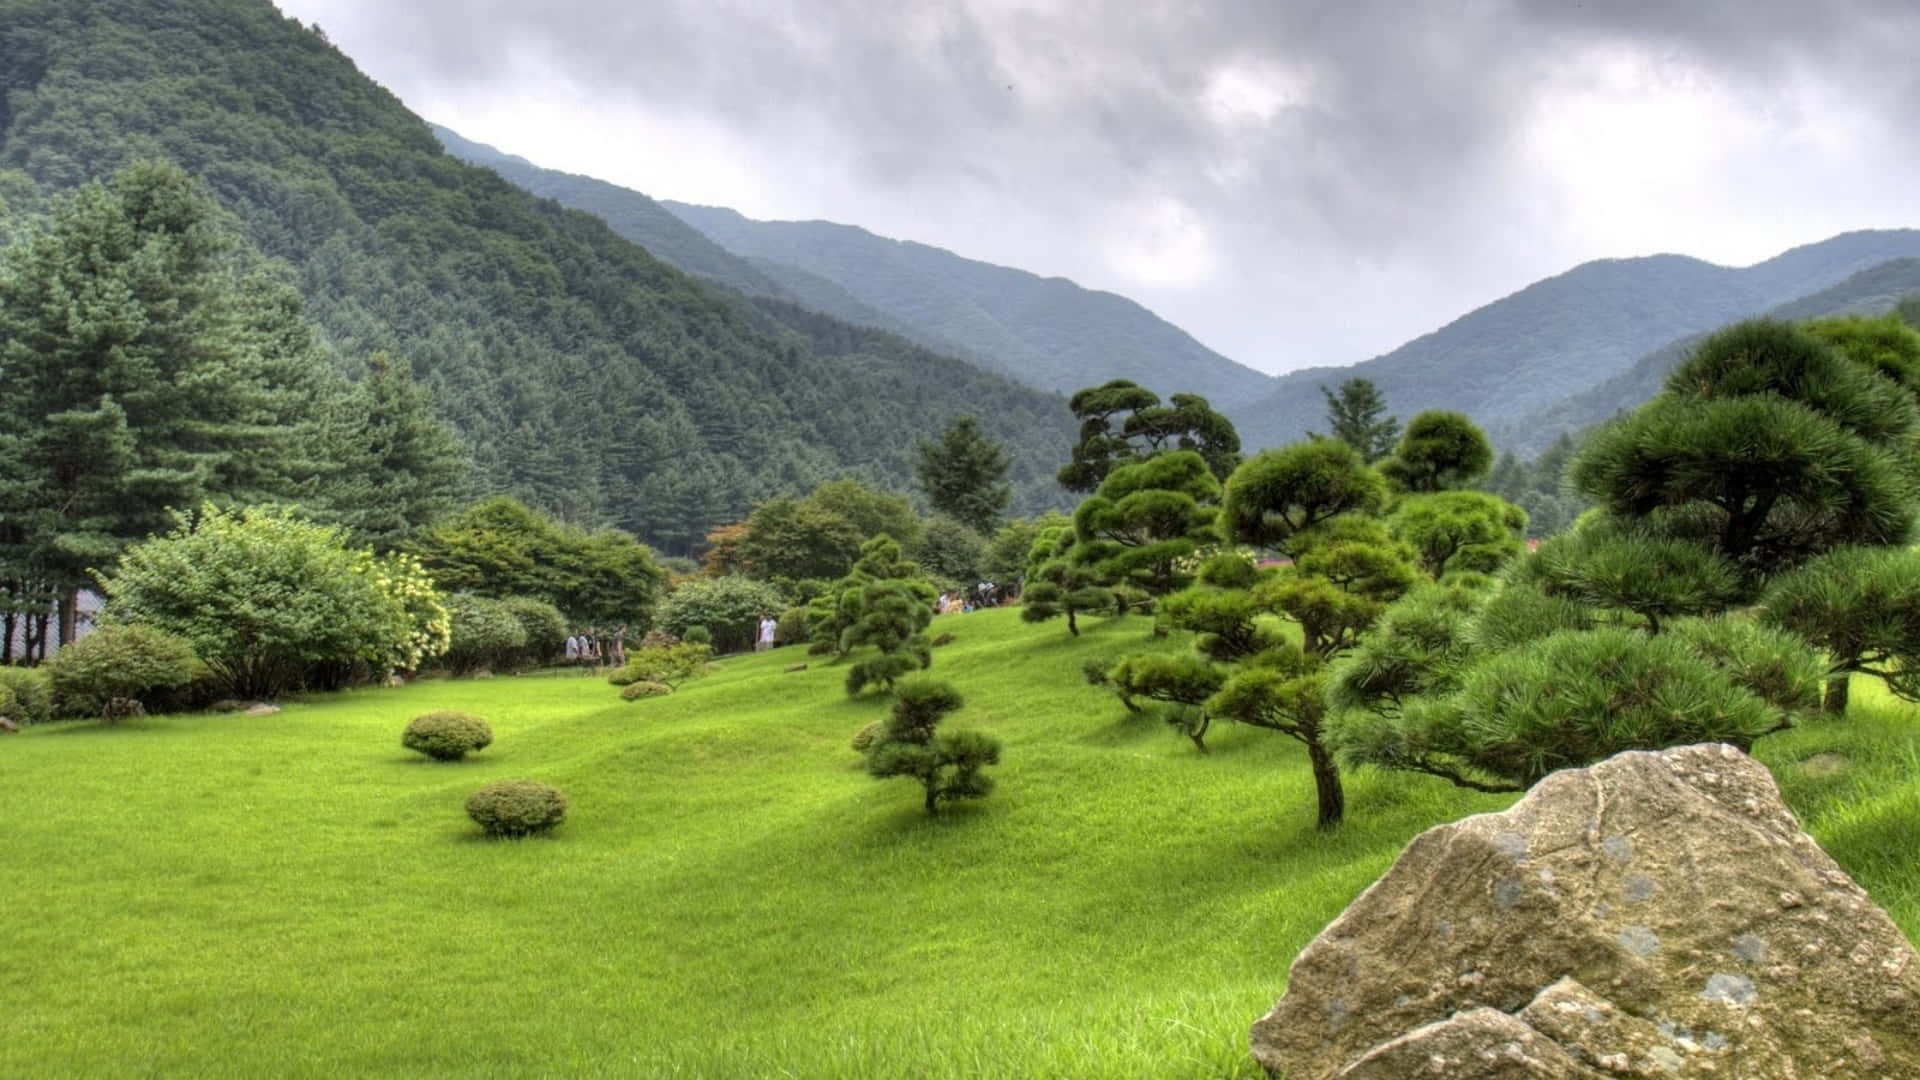 A Green Grassy Area With Trees And Rocks